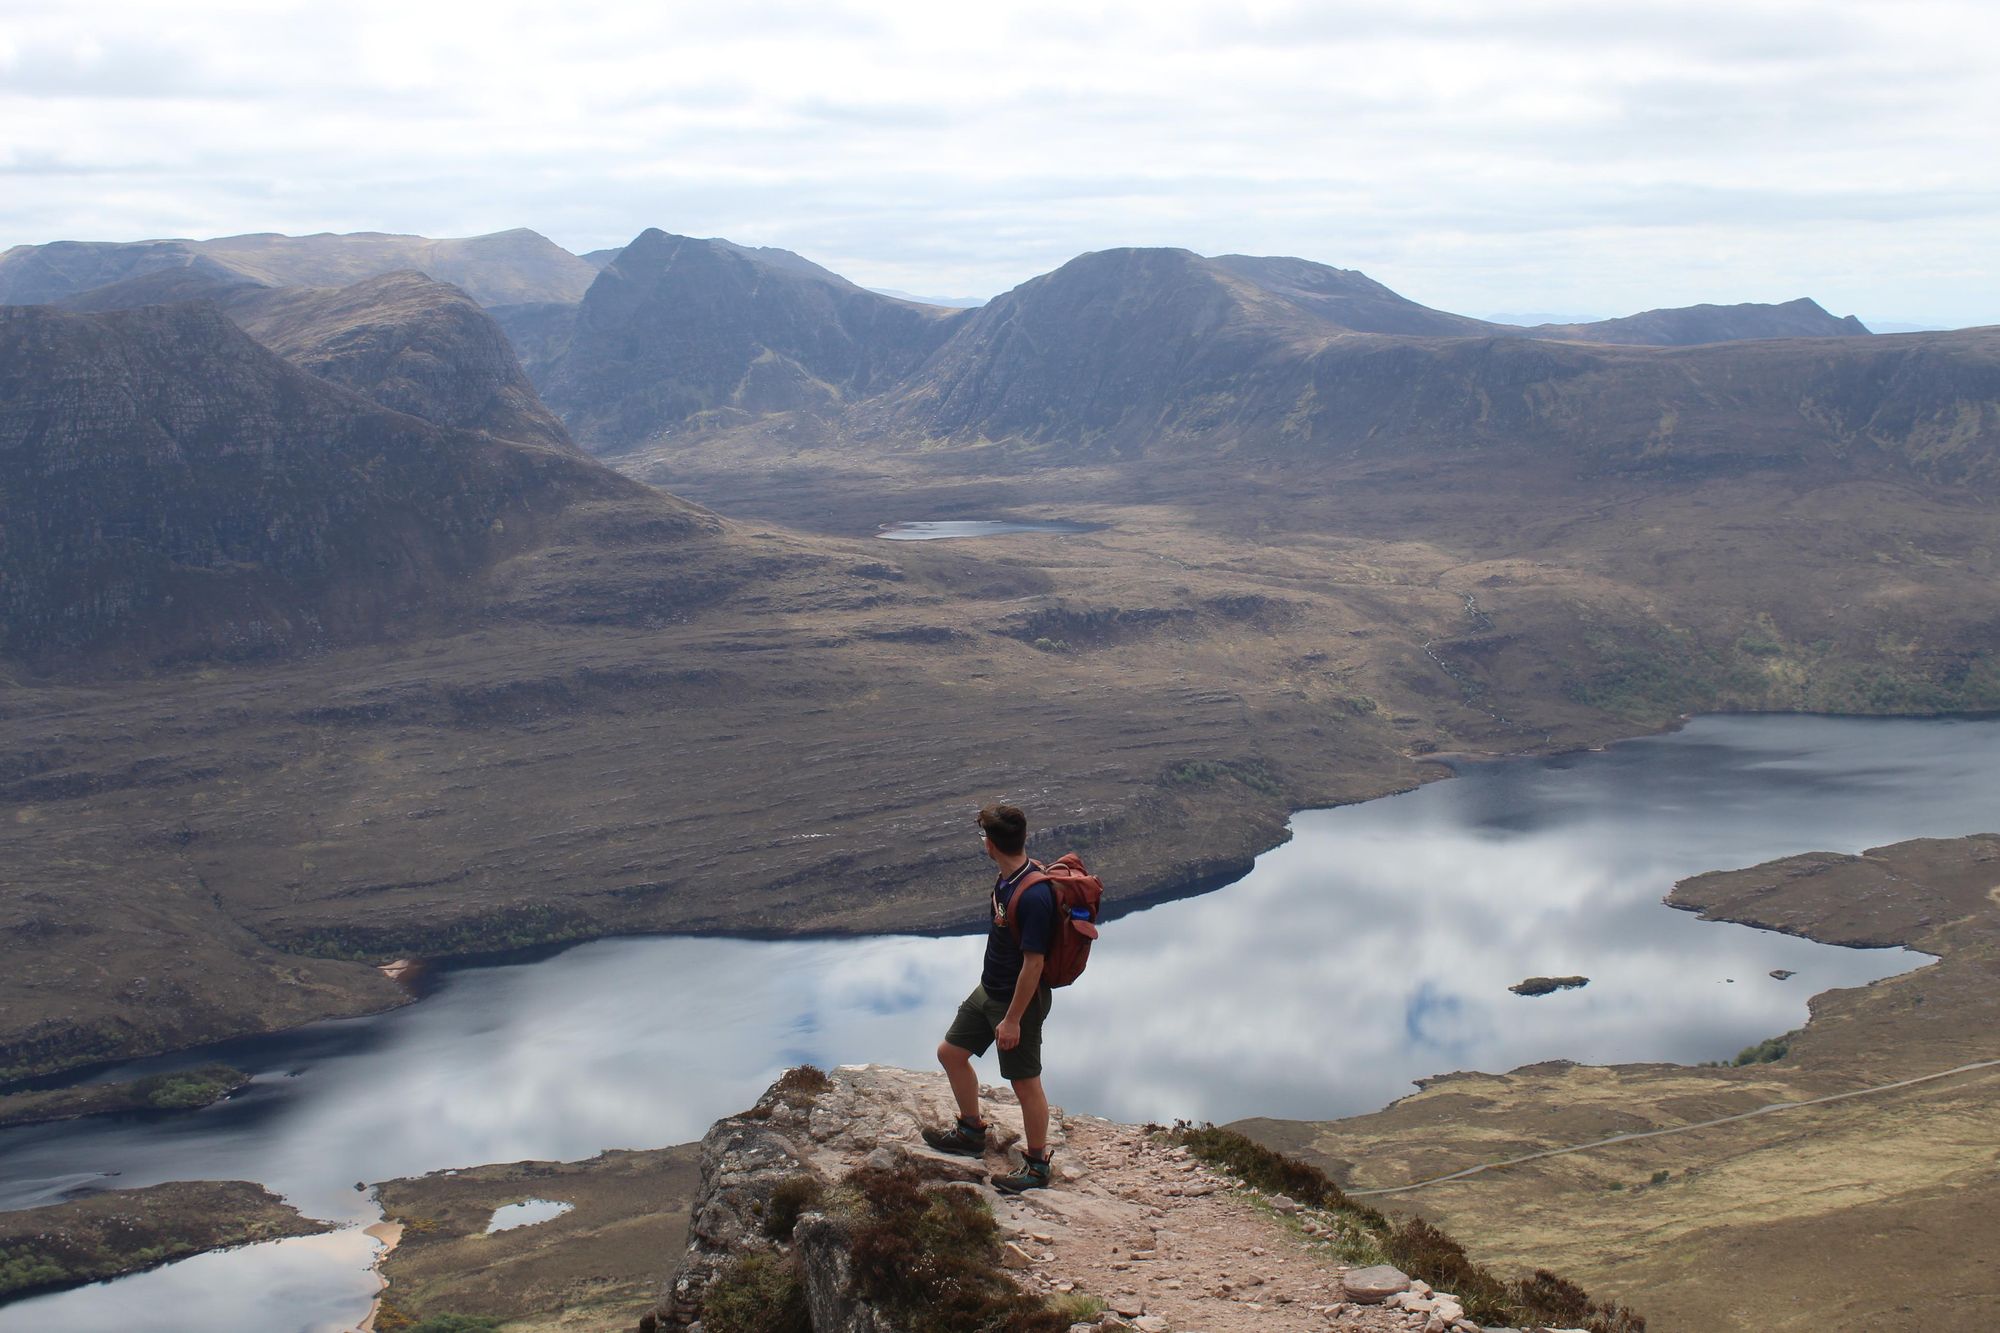 The author of the article atop Stac Pollaidh, looking out on one of the great Scottish landscapes. Photo: Stuart Kenny